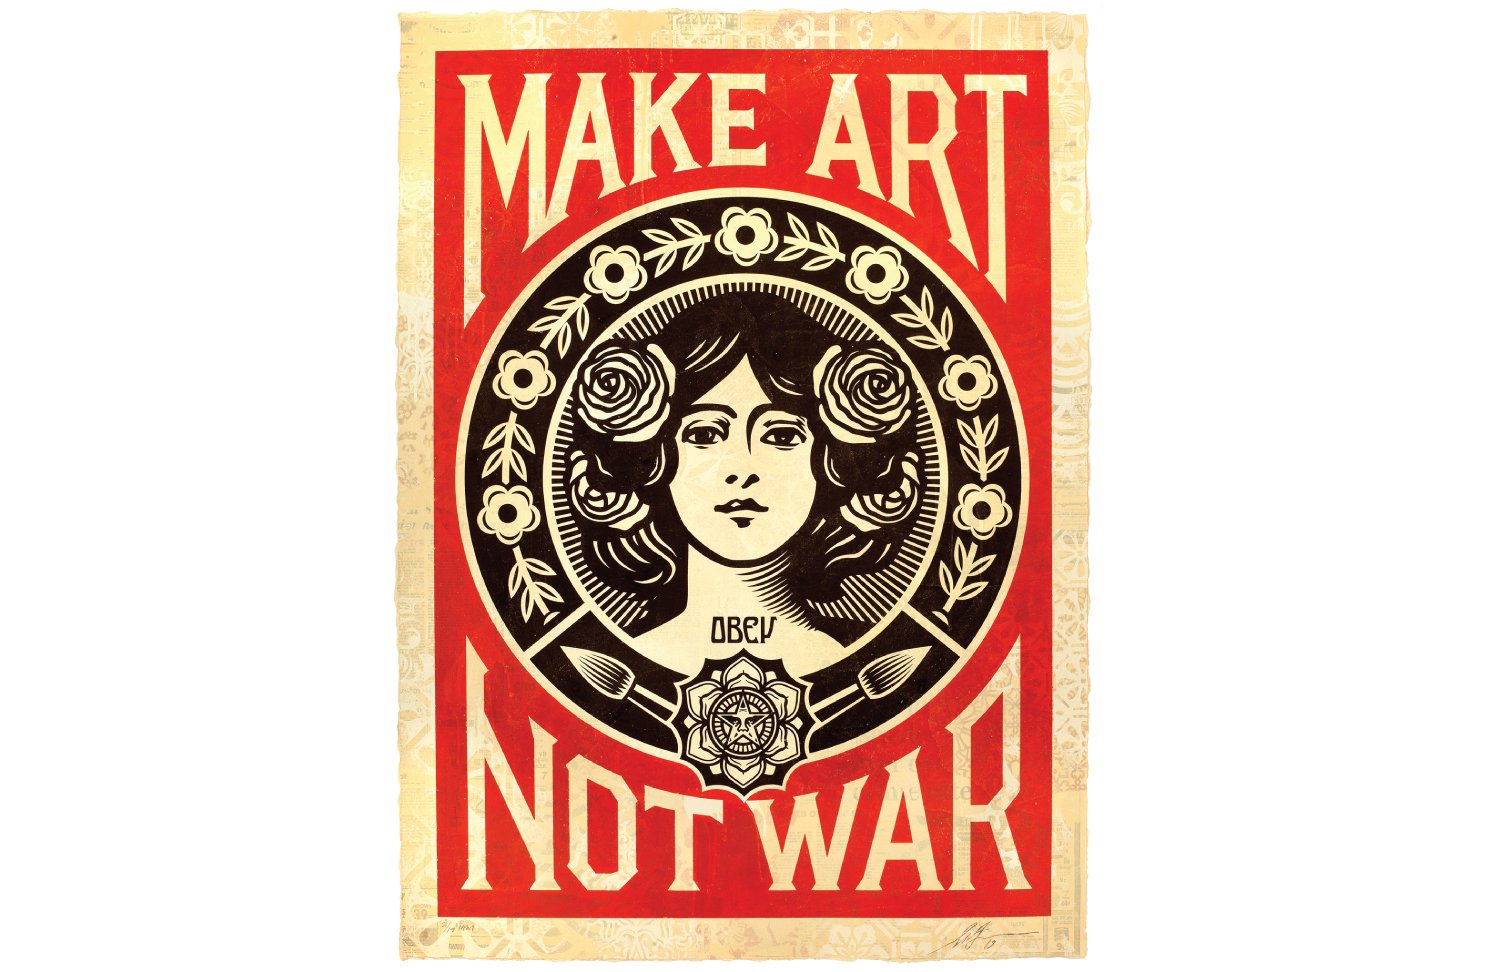   Shepard Fairey,   Make Art Not War , 2019  Silkscreen and mixed media collage on paper, 30 x 41 inches 